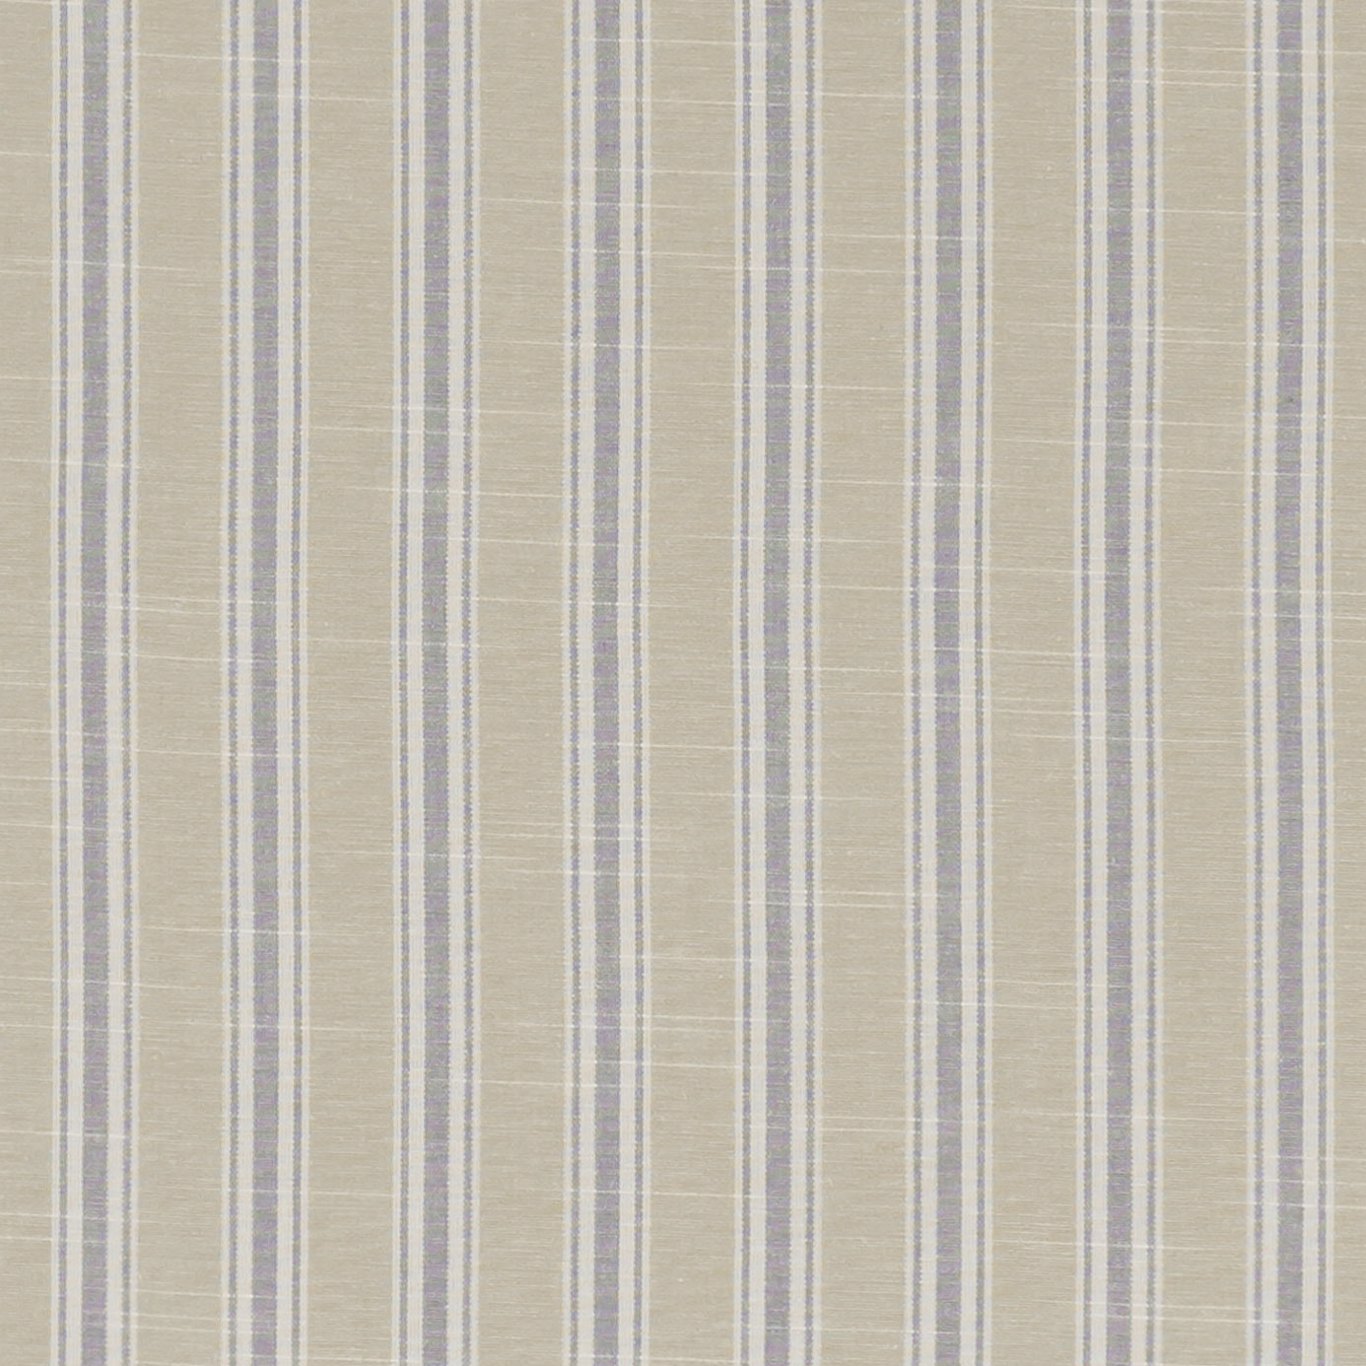 Thornwick Mineral Fabric by STG